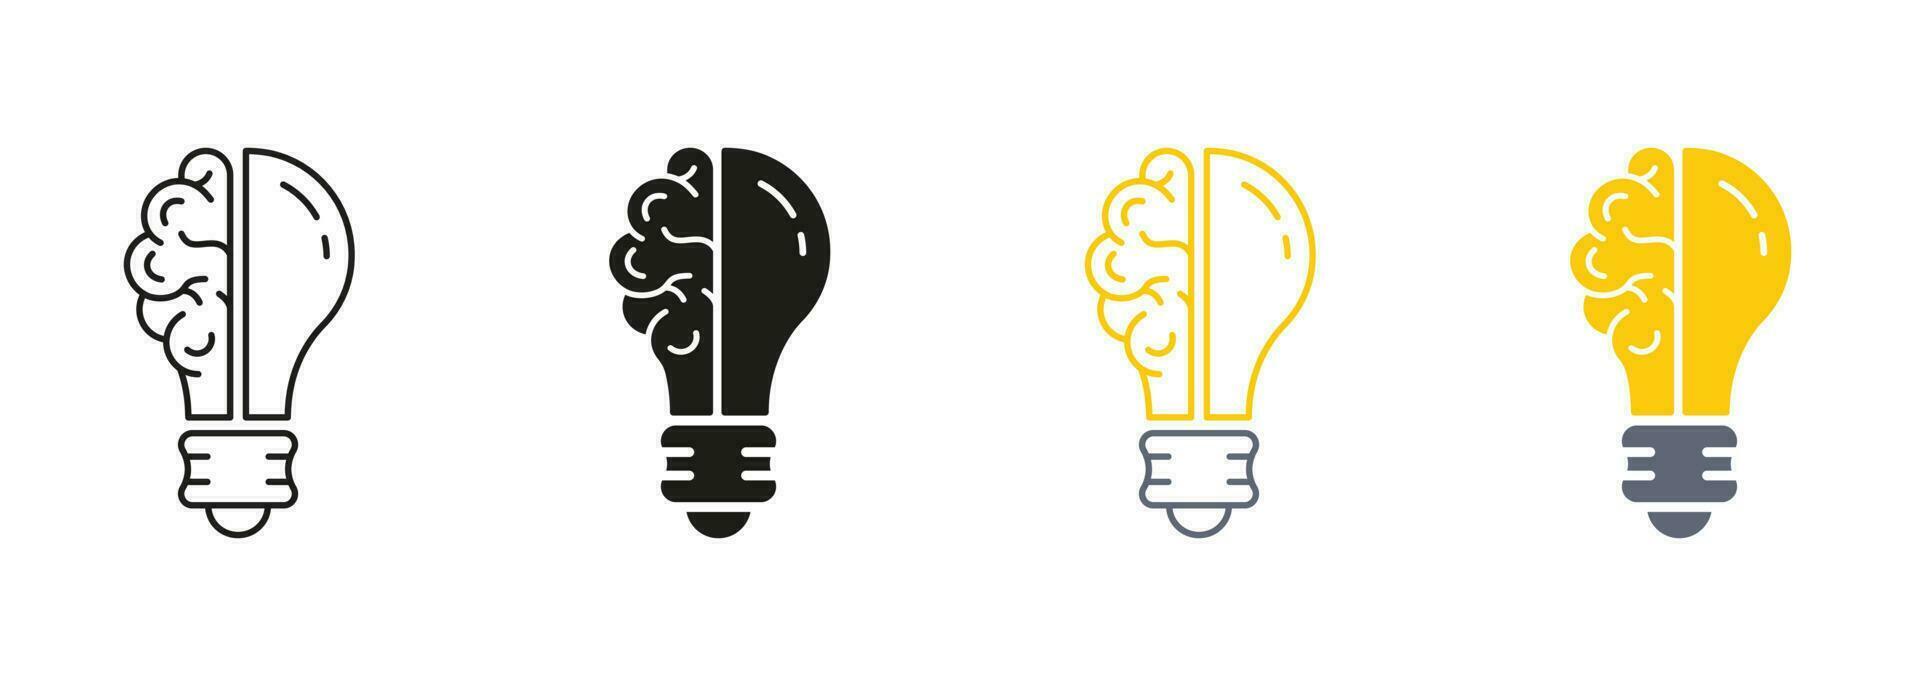 Light Bulb Inspiration, Knowledge, Smart Solution Line and Silhouette Color Icon Set. Human Brain and Lightbulb Idea Pictogram. Innovation Symbol on White Background. Isolated Vector Illustration.